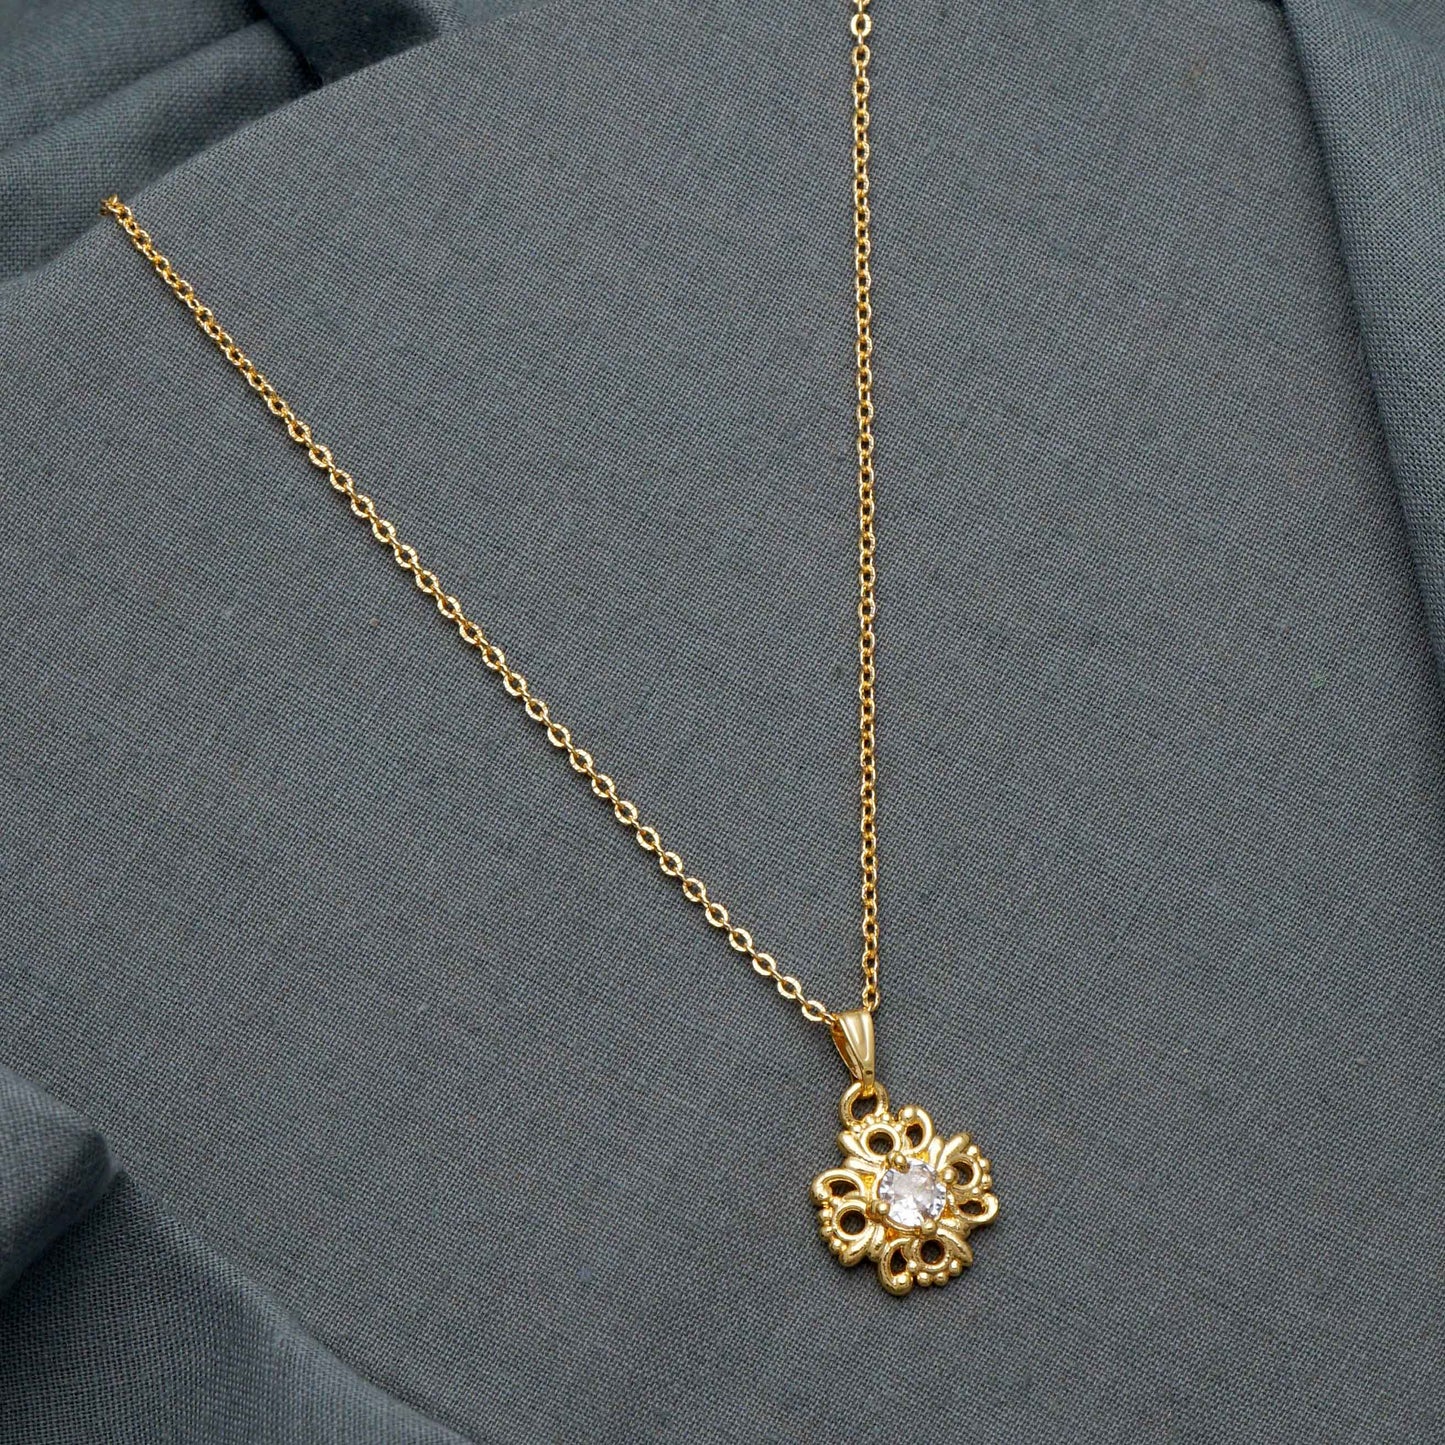 Charming Flower Shape Round Gold Plated Necklace Chain For Women and Girls